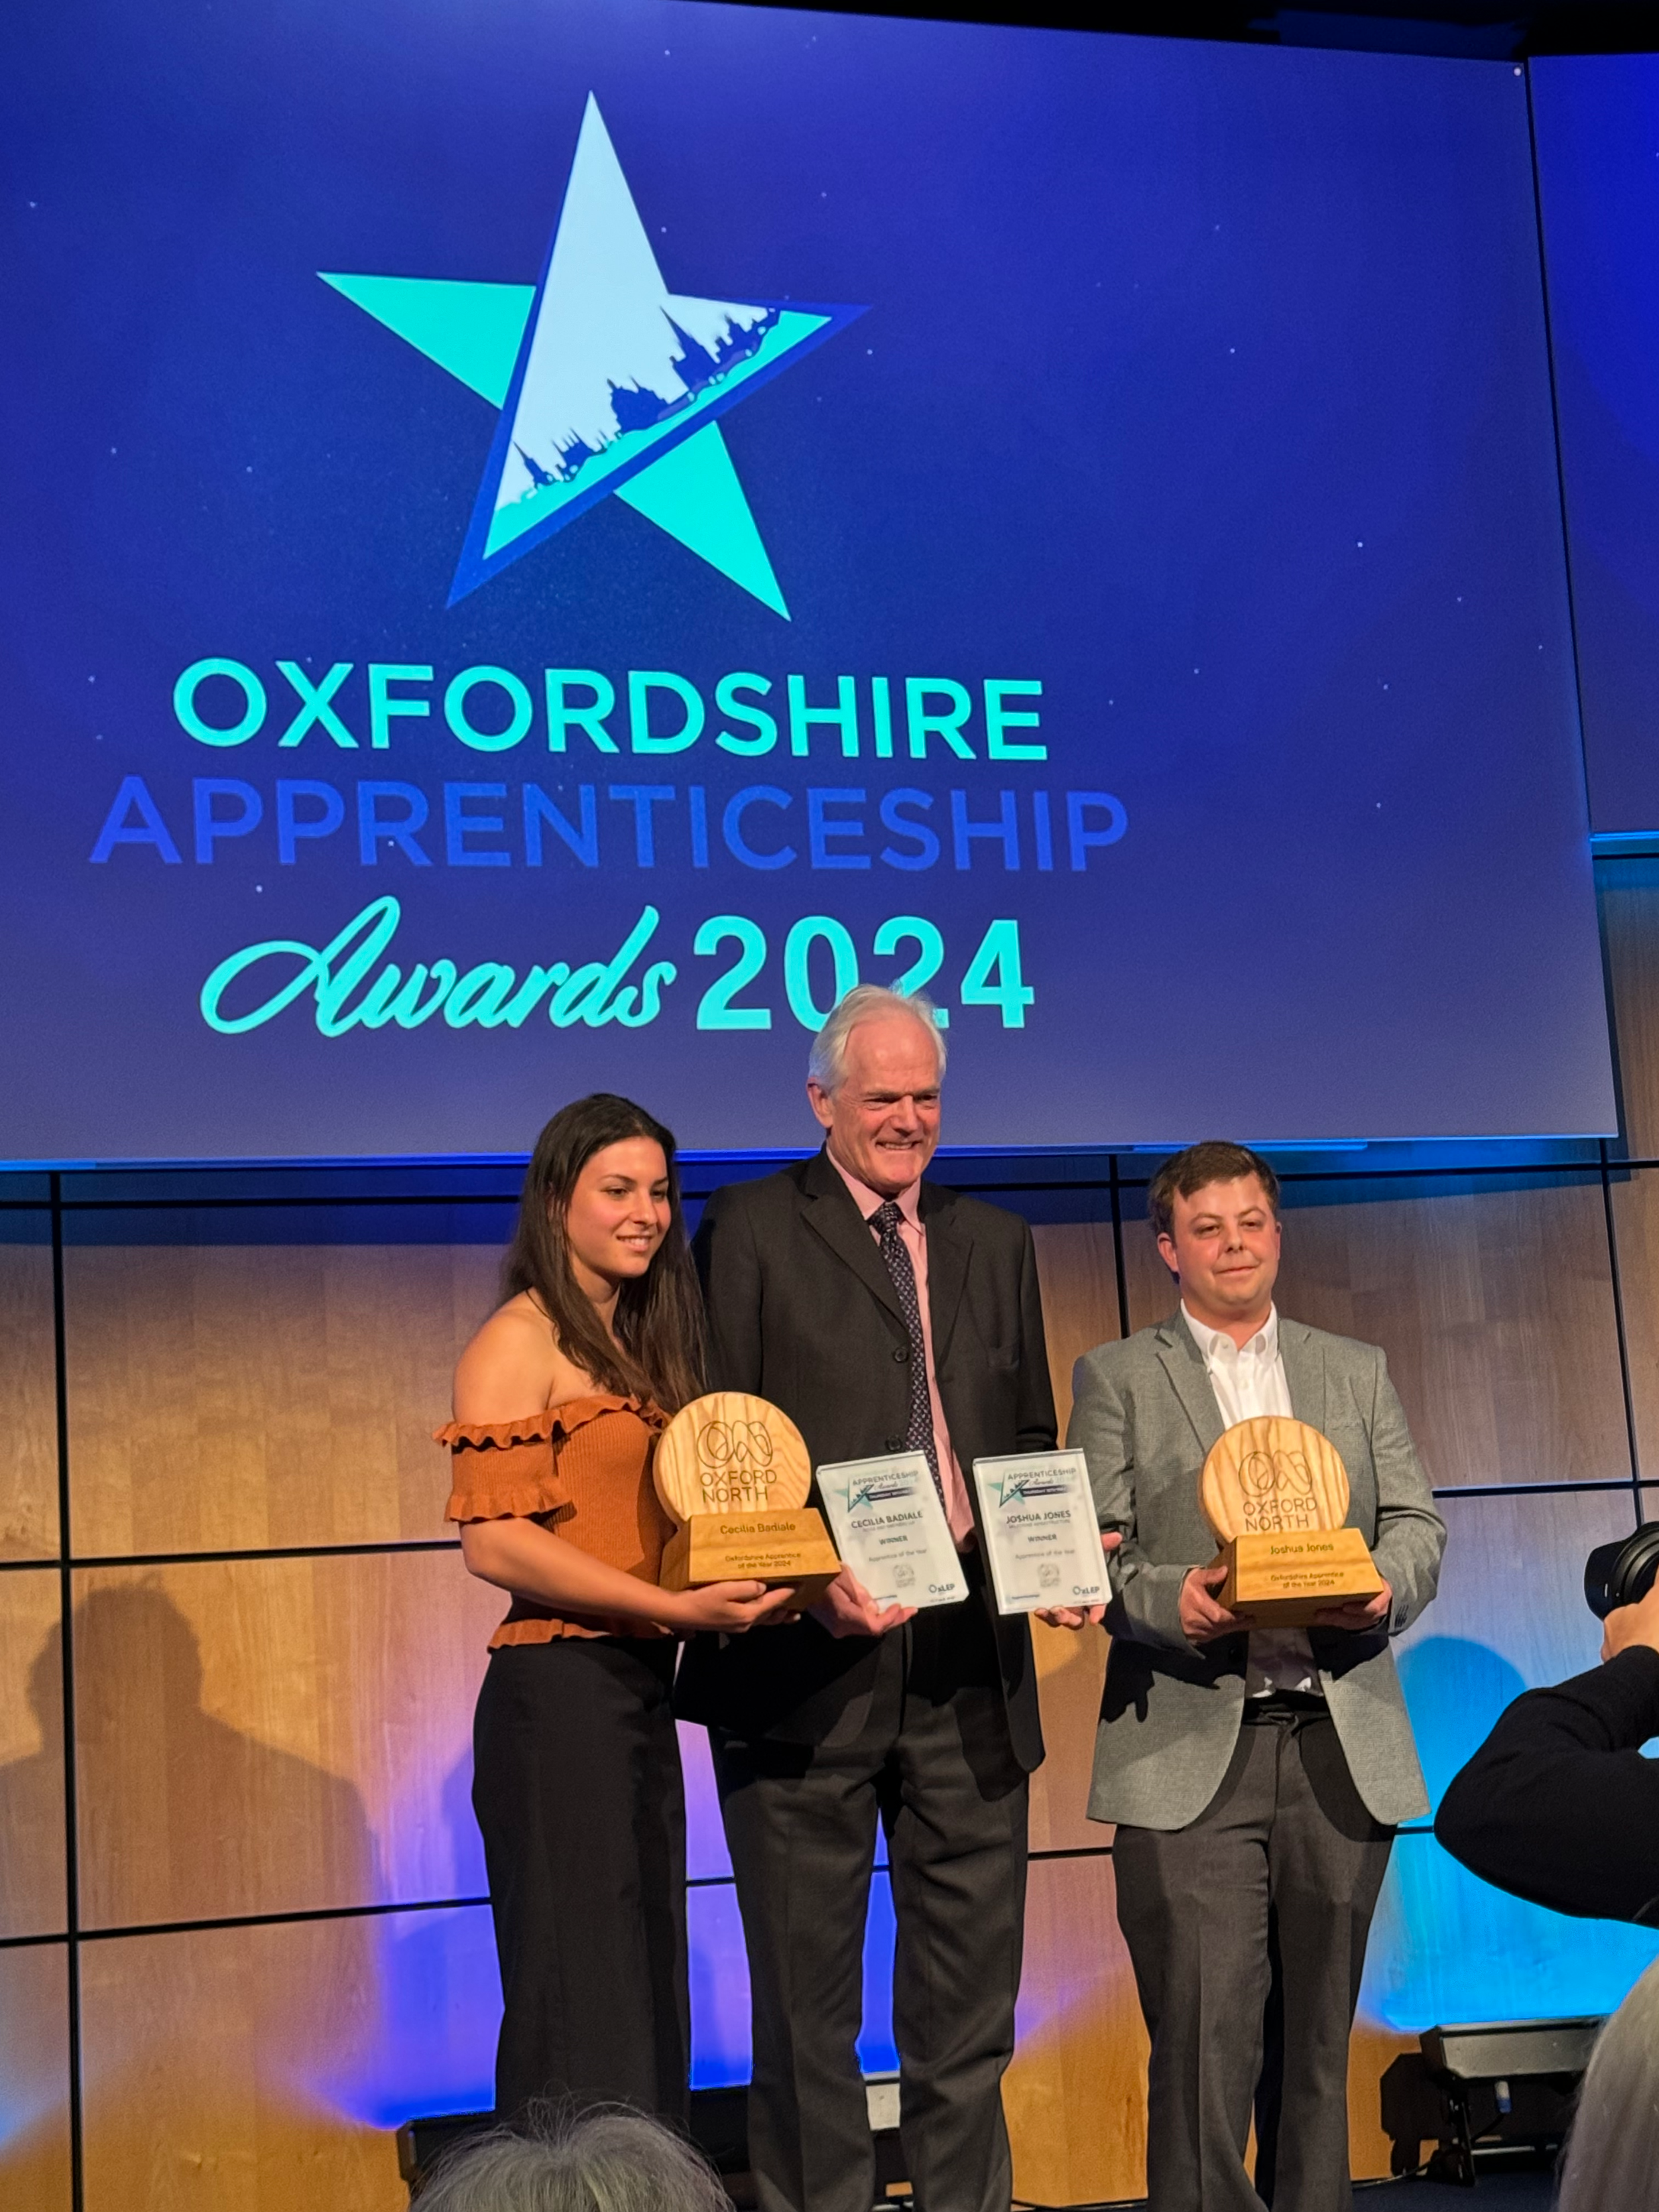 William Donger, CEO, Thomas White Oxford presenting Overall Apprentice of the Year winners